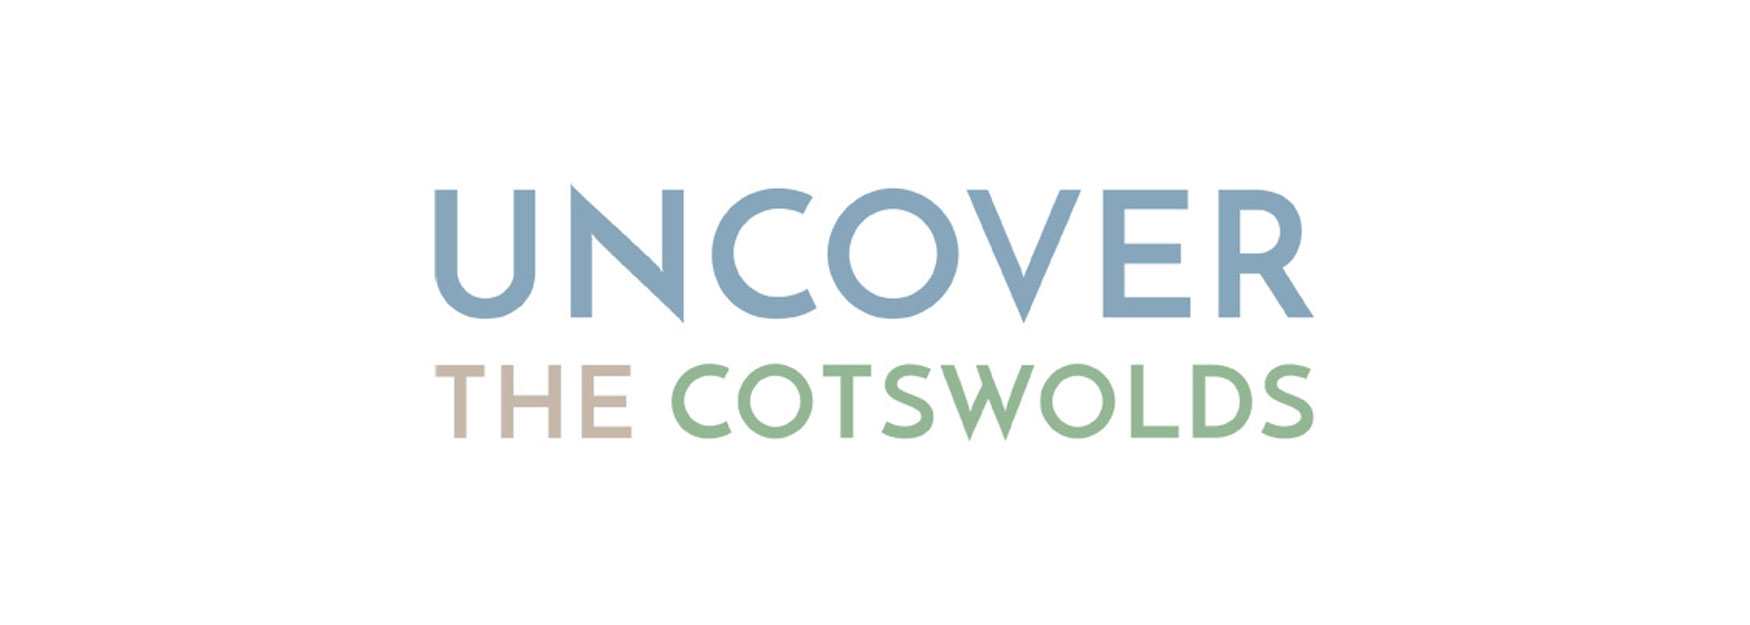 Uncover the Cotswolds - our Discover England Fund project to discover and promote new experiences to the travel trade